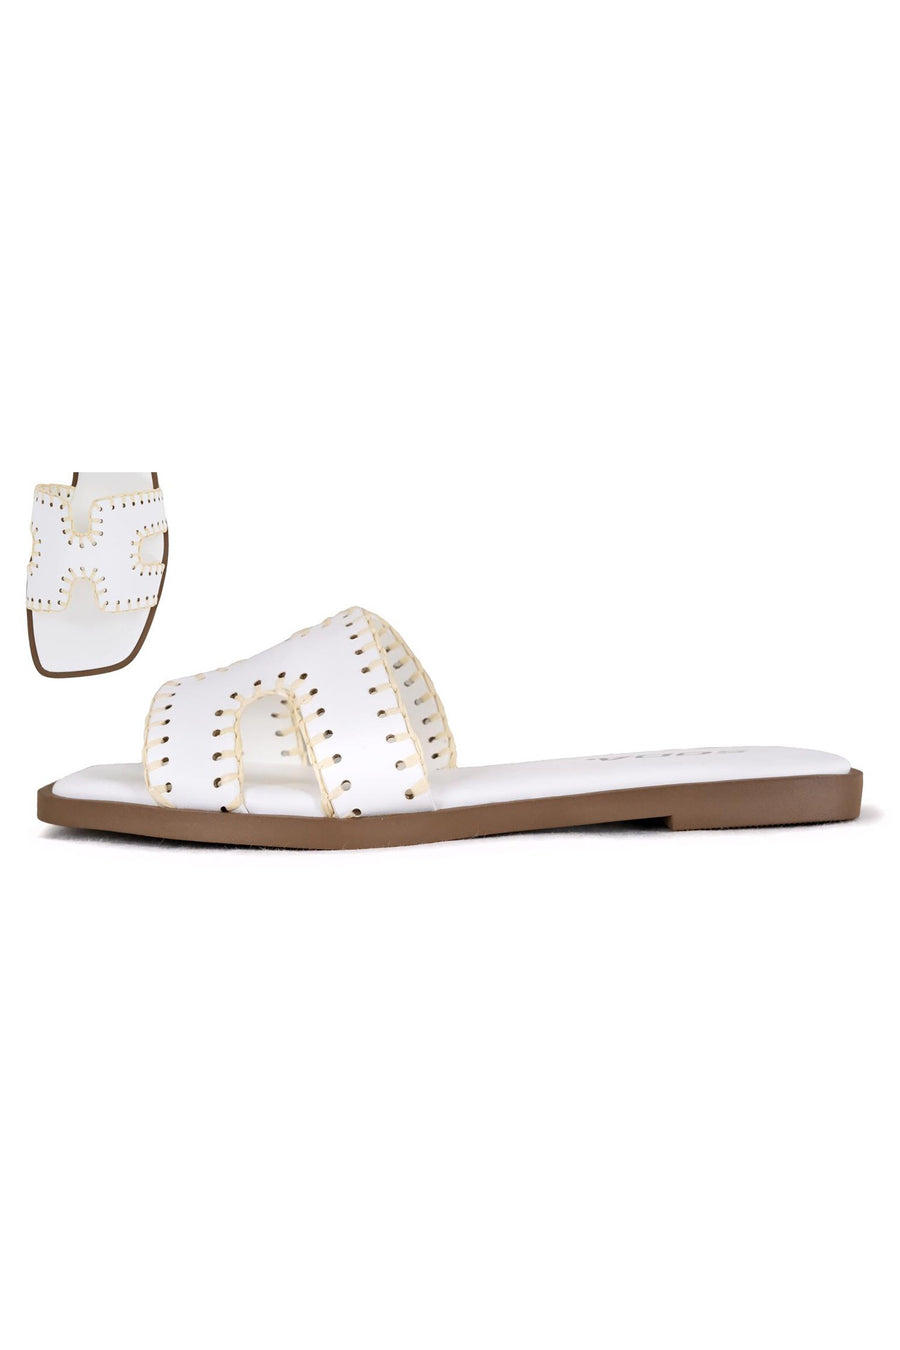 Featuring an open toe sandal with stitching details on the sides in the color white 